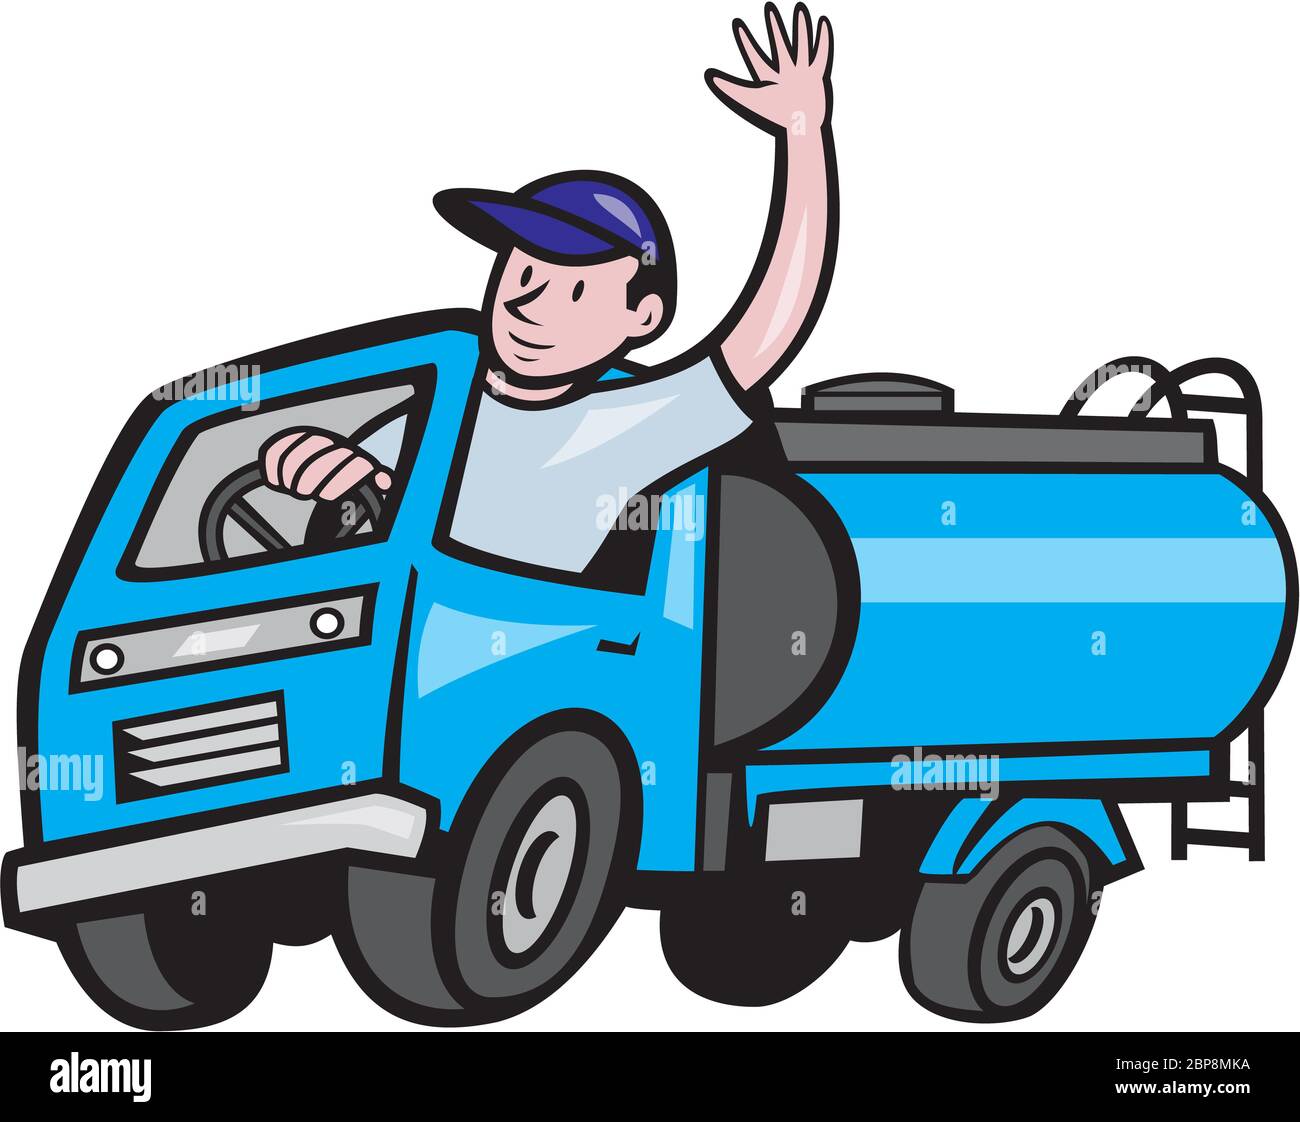 Illustration of a 4 wheeler baby tanker truck petrol tanker with driver waving hello on isolated white background done in cartoon style. Stock Photo